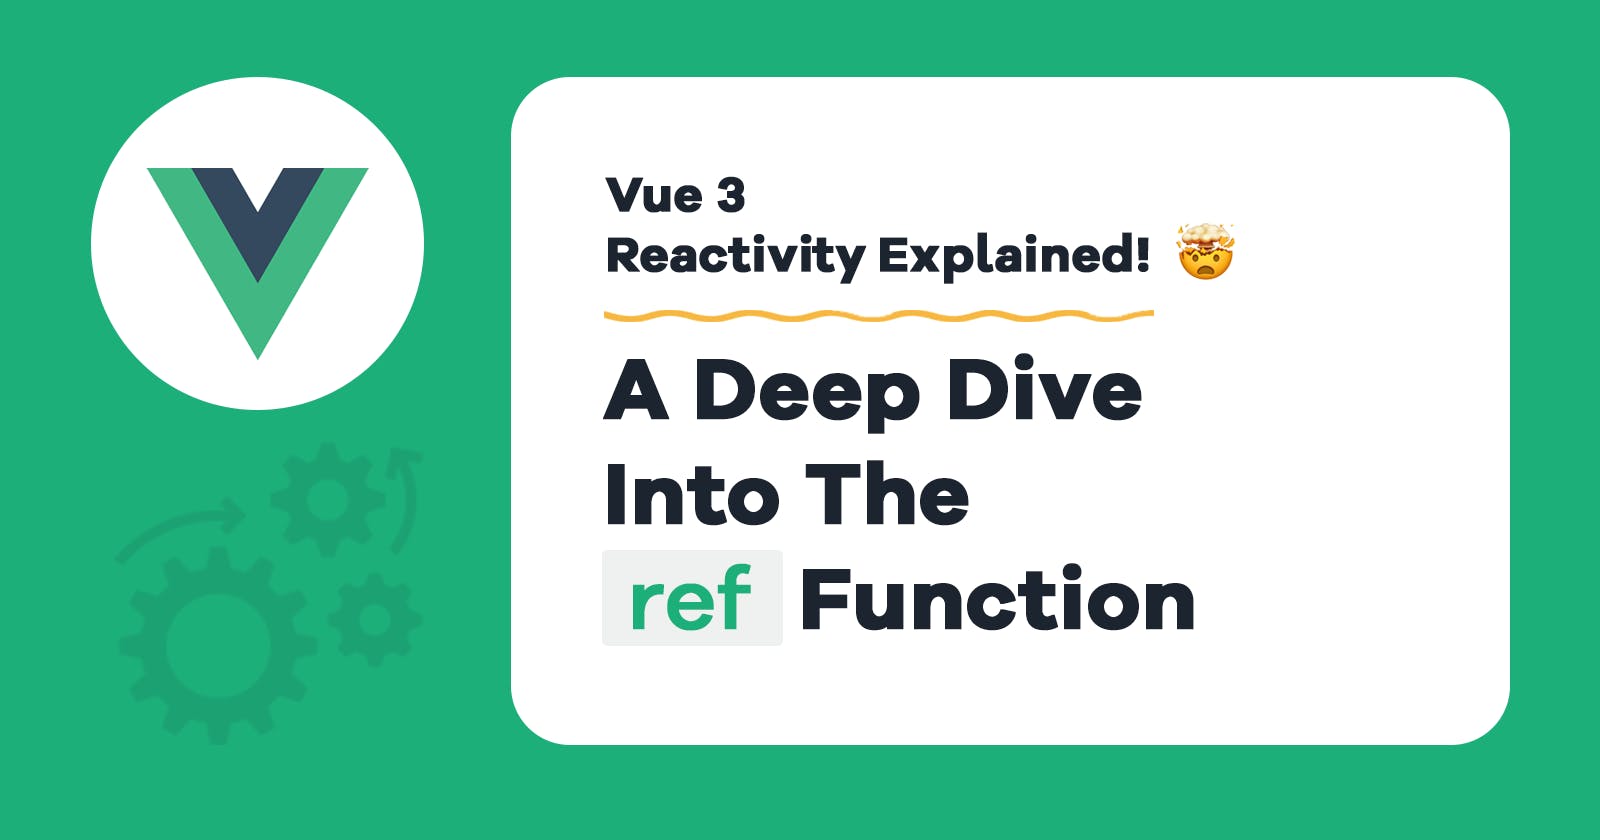 Vue 3 Reactivity Explained: A Deep Dive into the "ref" Function